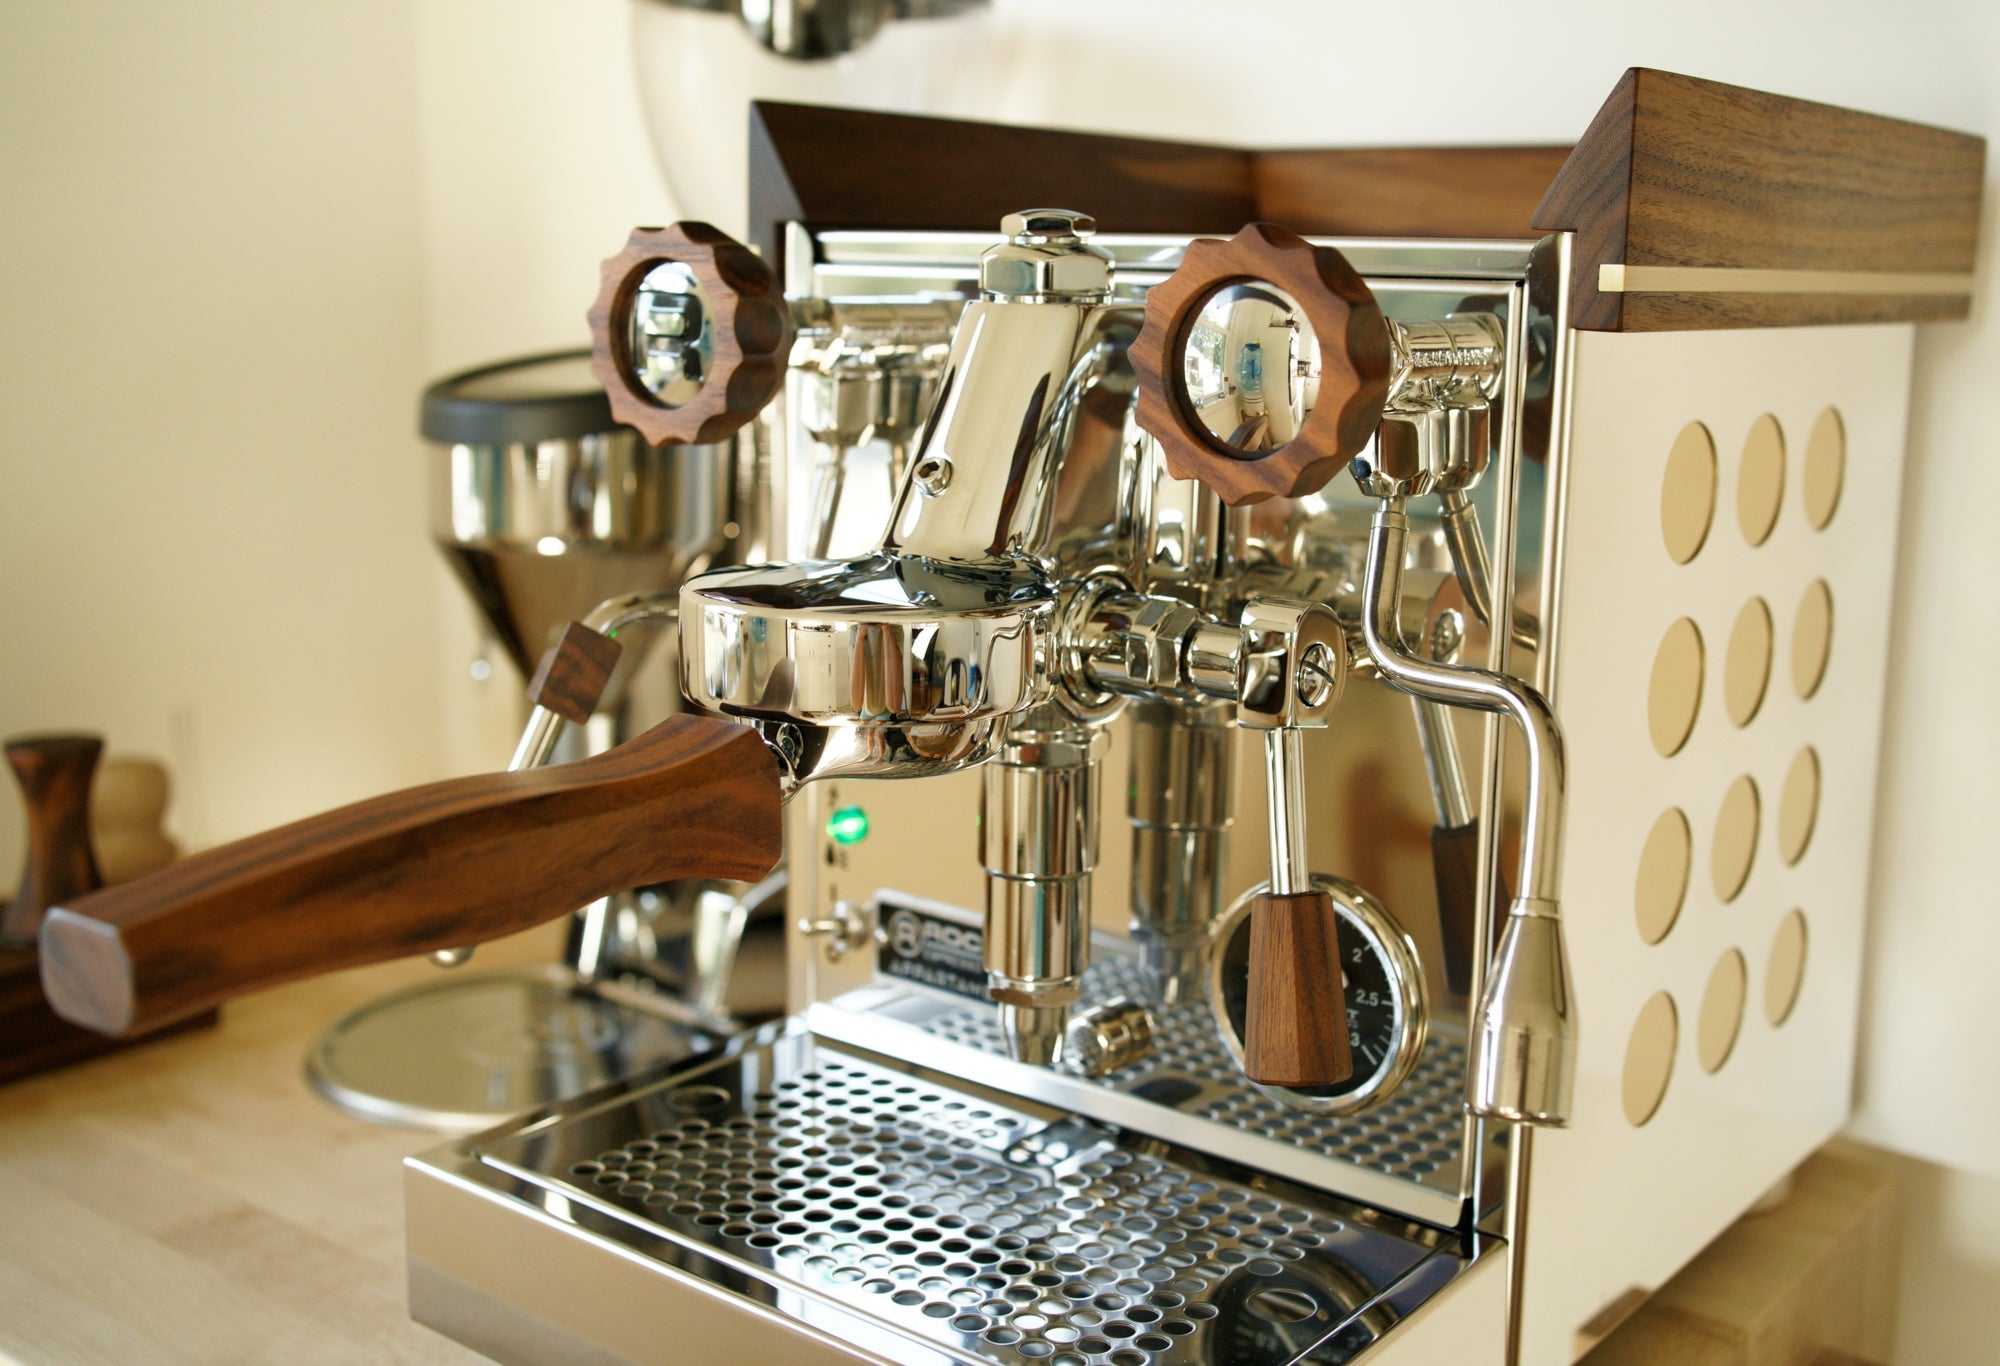 Luxury espresso machine with walnut wood accents finished with a hardwax oil wood finish.